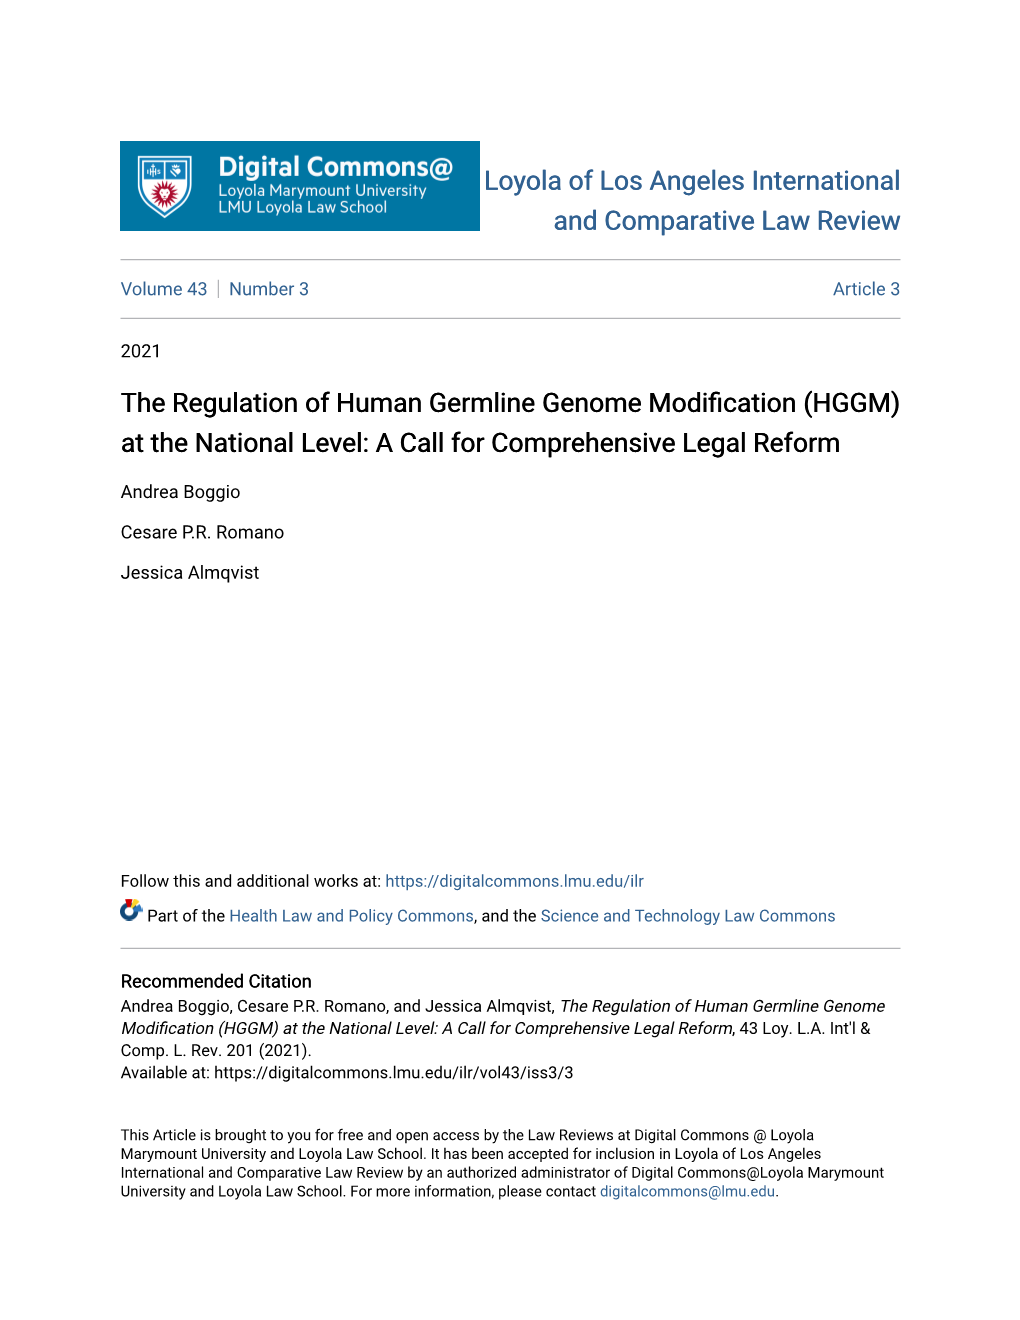 The Regulation of Human Germline Genome Modification (HGGM) at the National Level: a Call for Comprehensive Legal Reform